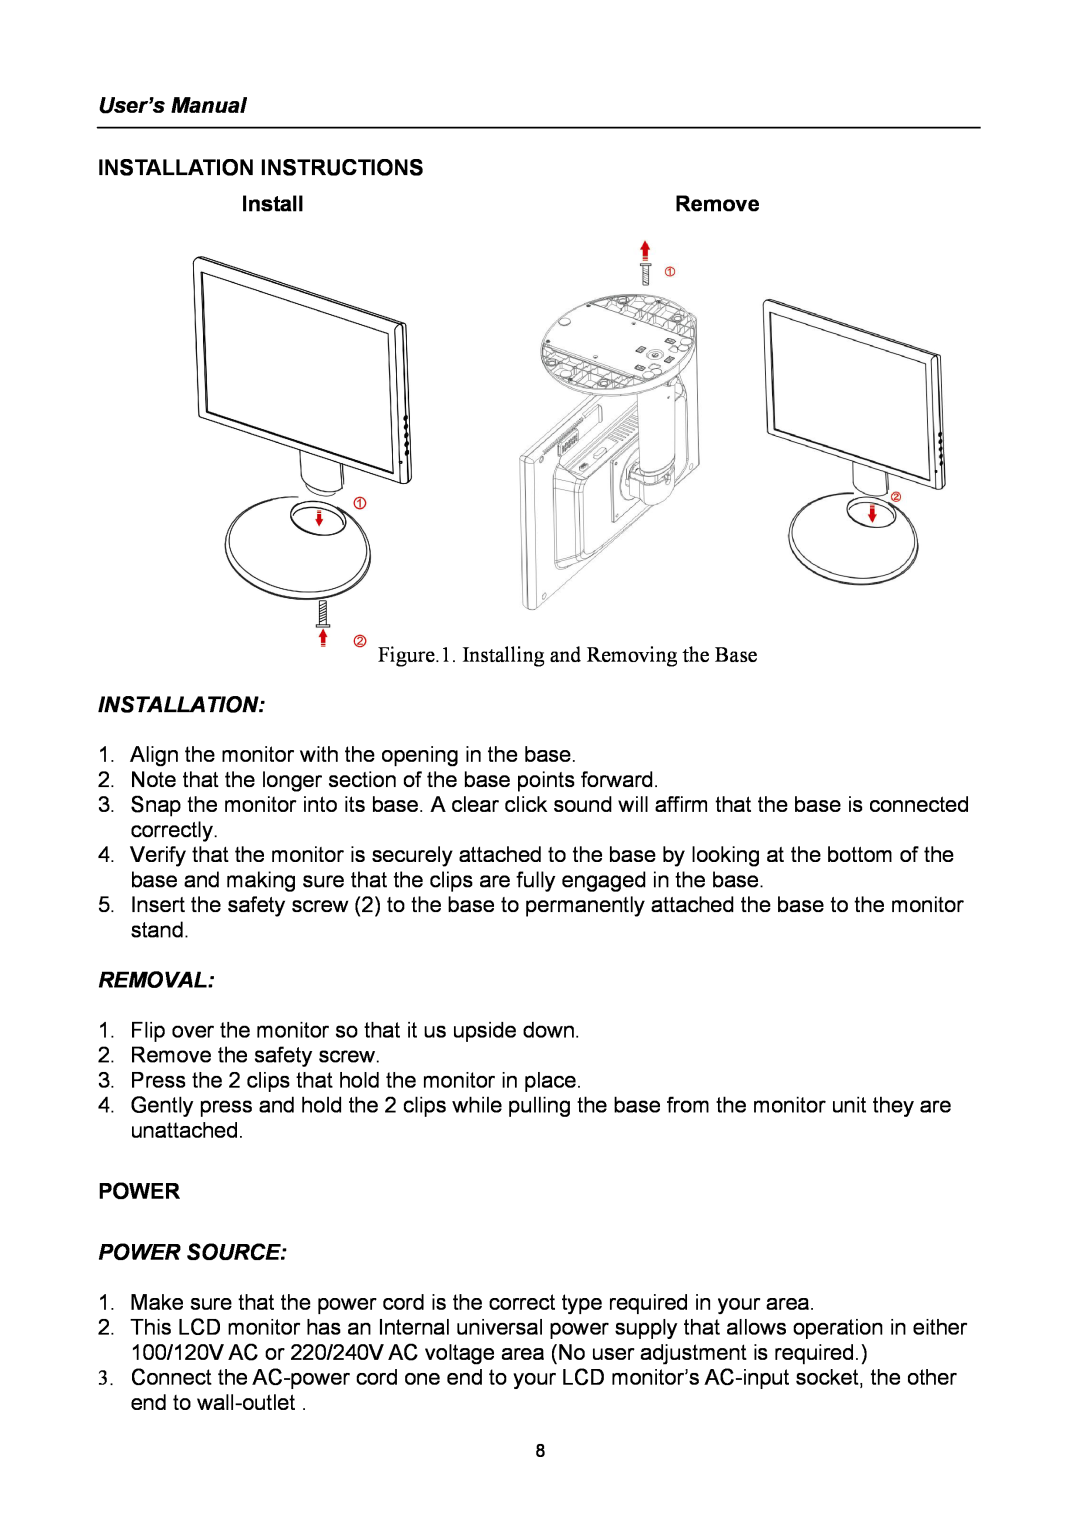 Compaq HW194 user manual User’s Manual, Installation Instructions, Removal, Power Source 